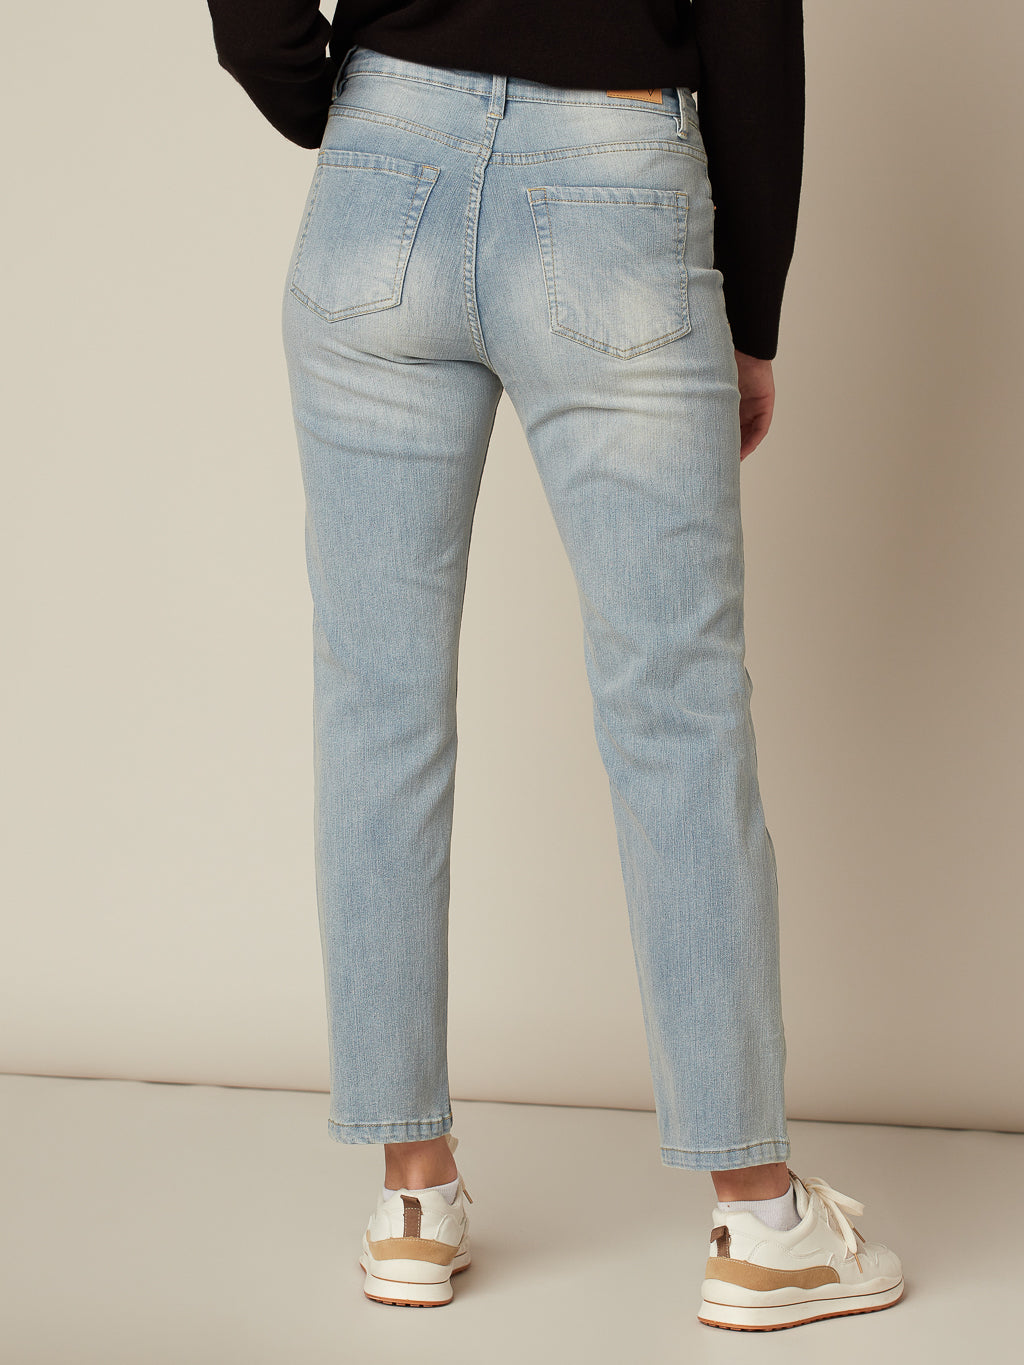 Narrow fitted jean